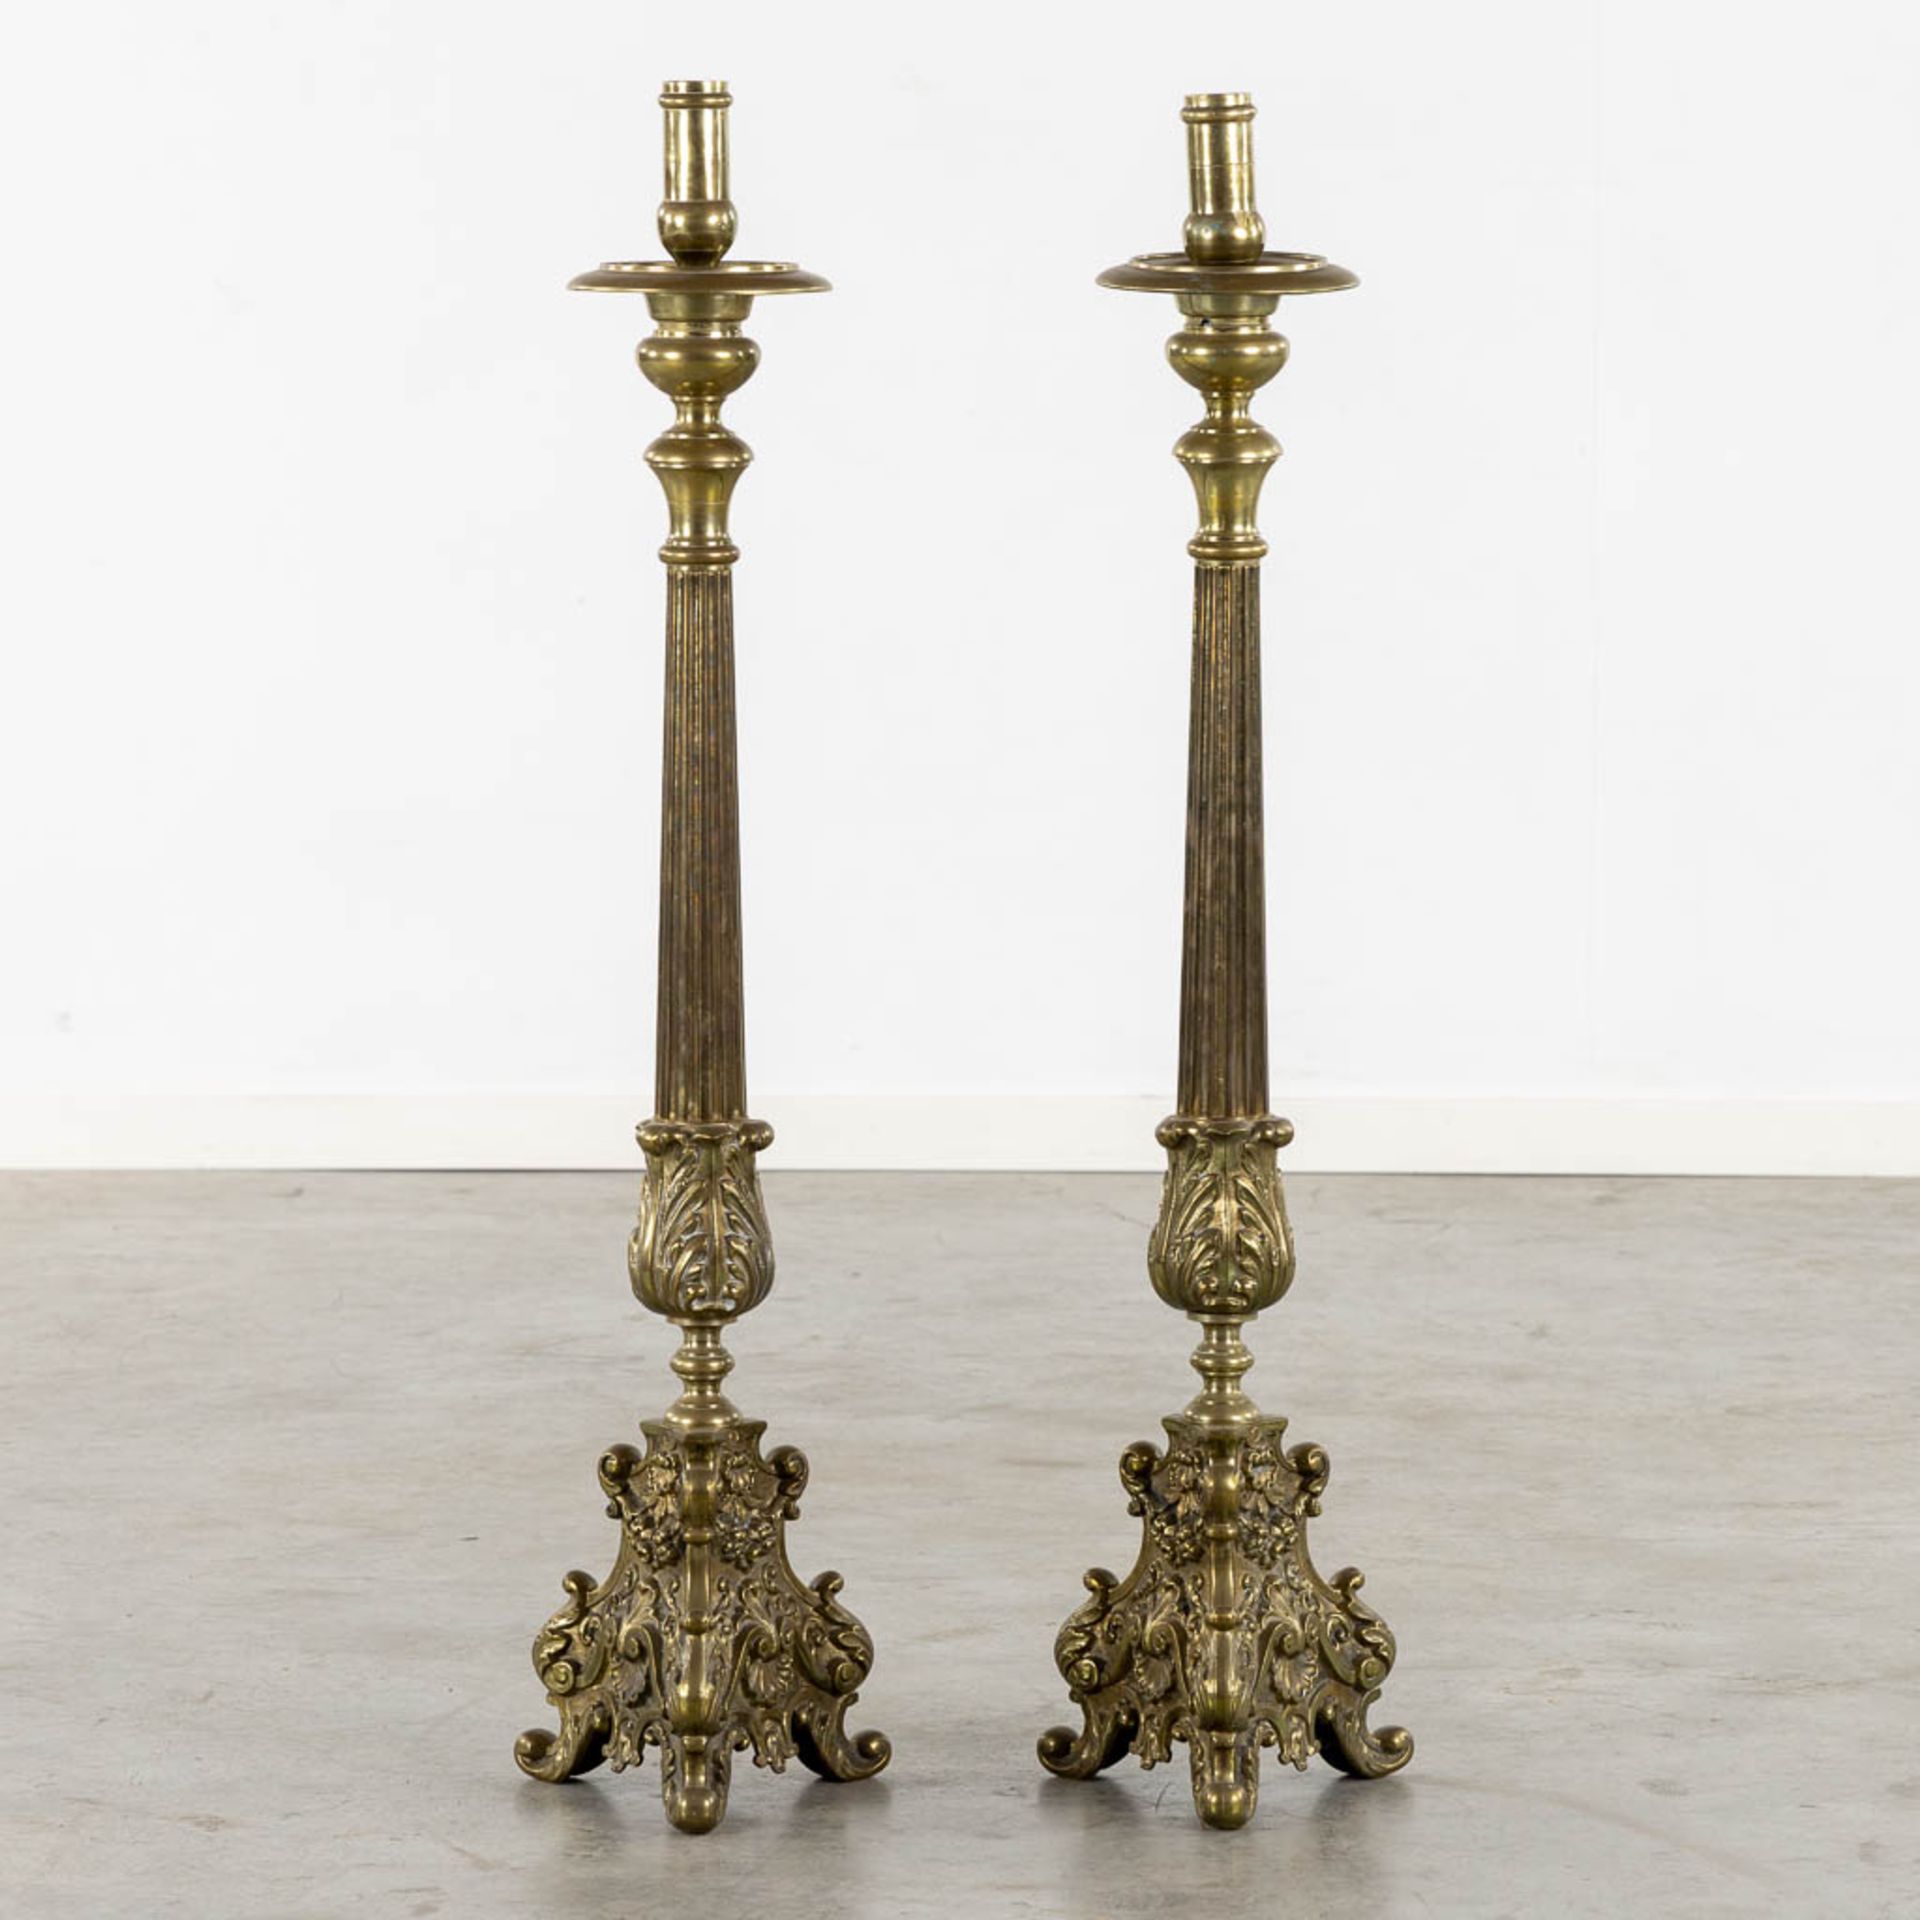 A pair of bronze church candlesticks/candle holders, Louis XV style. Circa 1900. (W:23 x H:105 cm) - Image 12 of 19